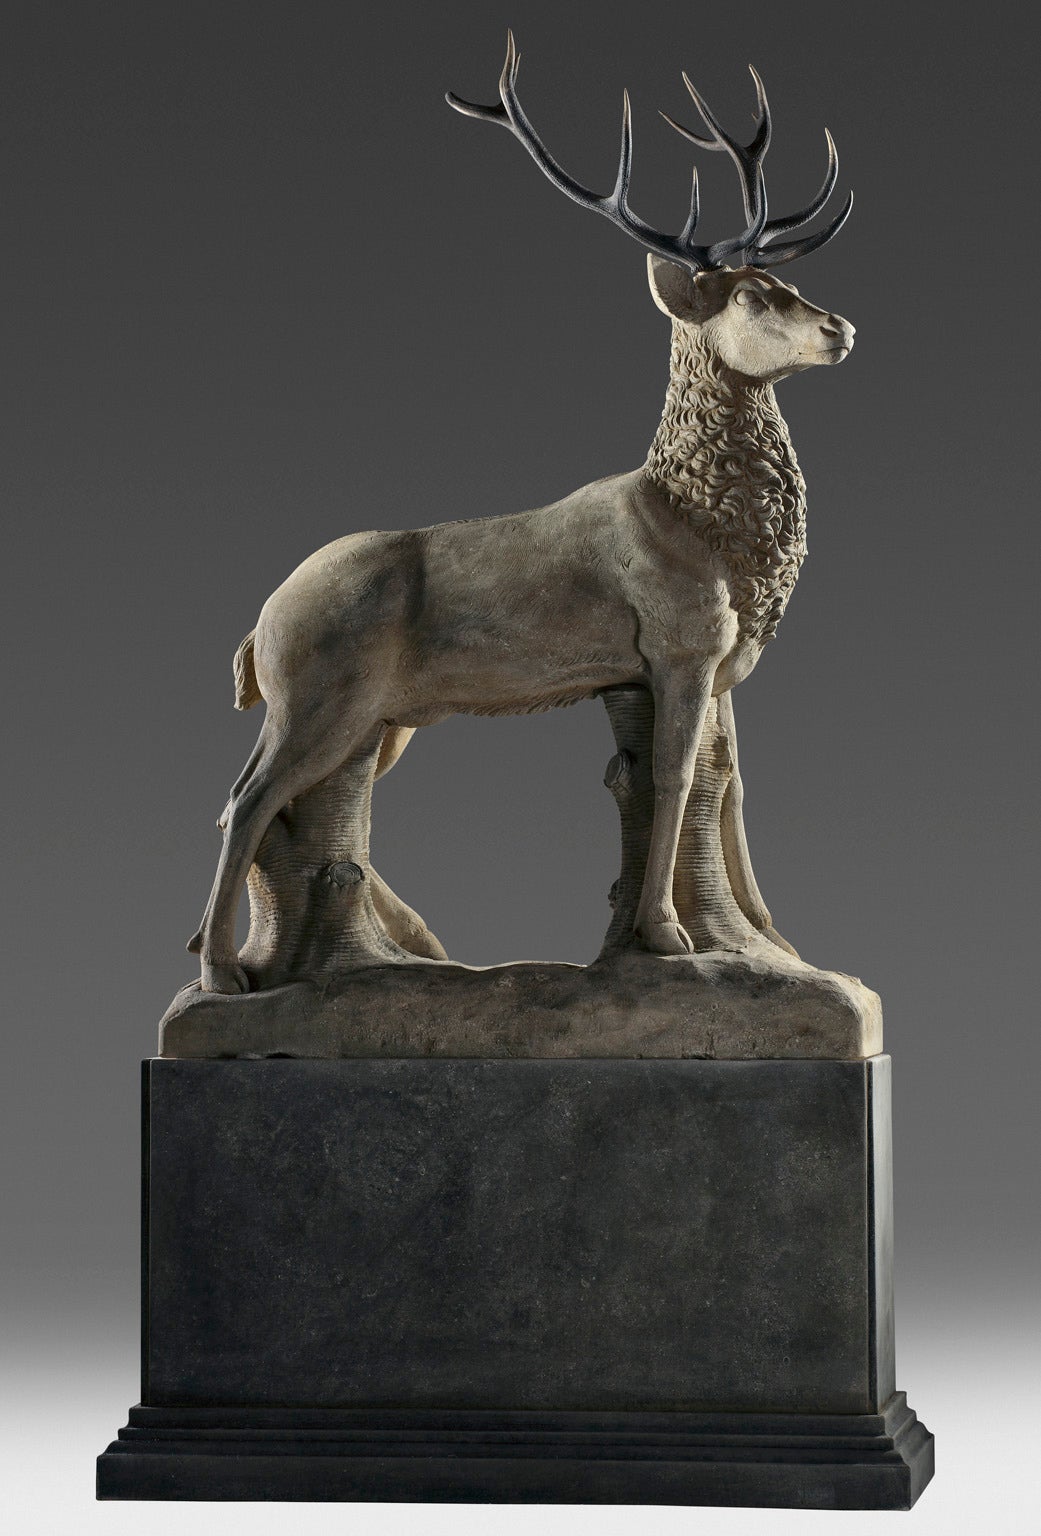 Carved Large Sculpted Limestone and Antler Mounted Model of a Stag / Reindeer